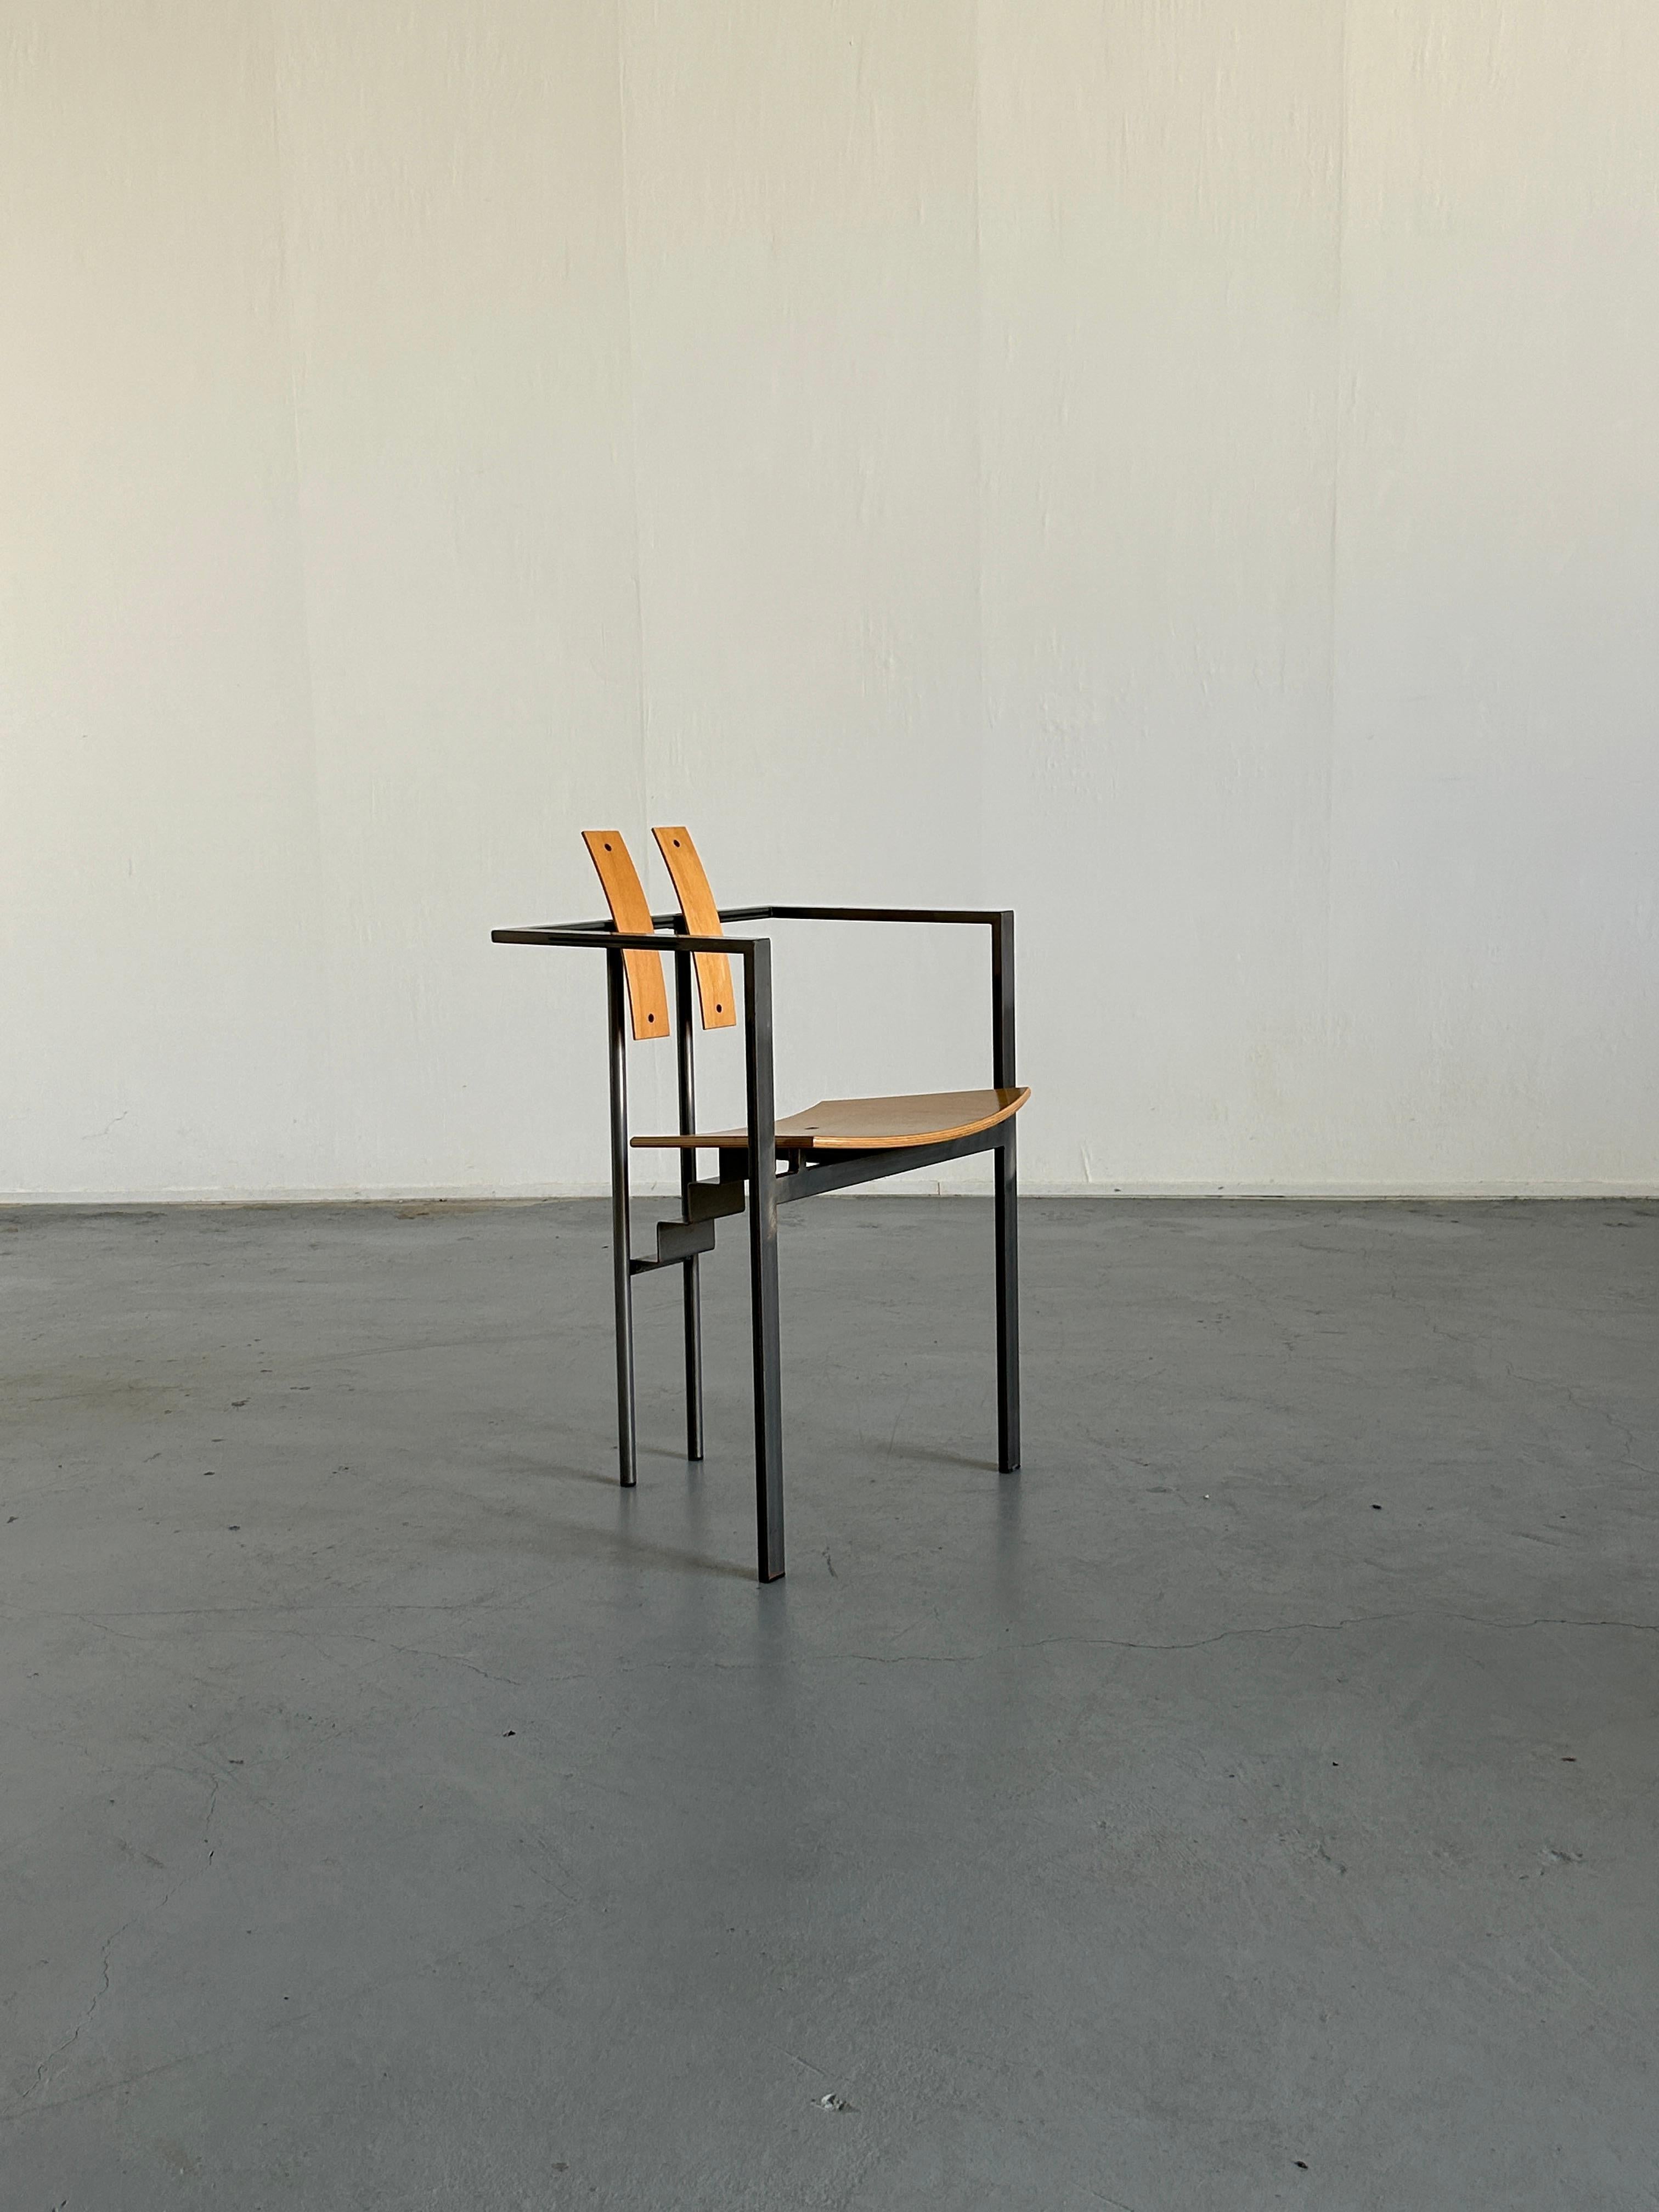 A steel and plywood postmodern 'Trix' chair designed in the 1980s in Germany by Karl Friedrich Förste for KFF, his own manufacturing company. Unique, geometrical and Memphis-influenced design. 

Overall very well preserved and in excellent vintage